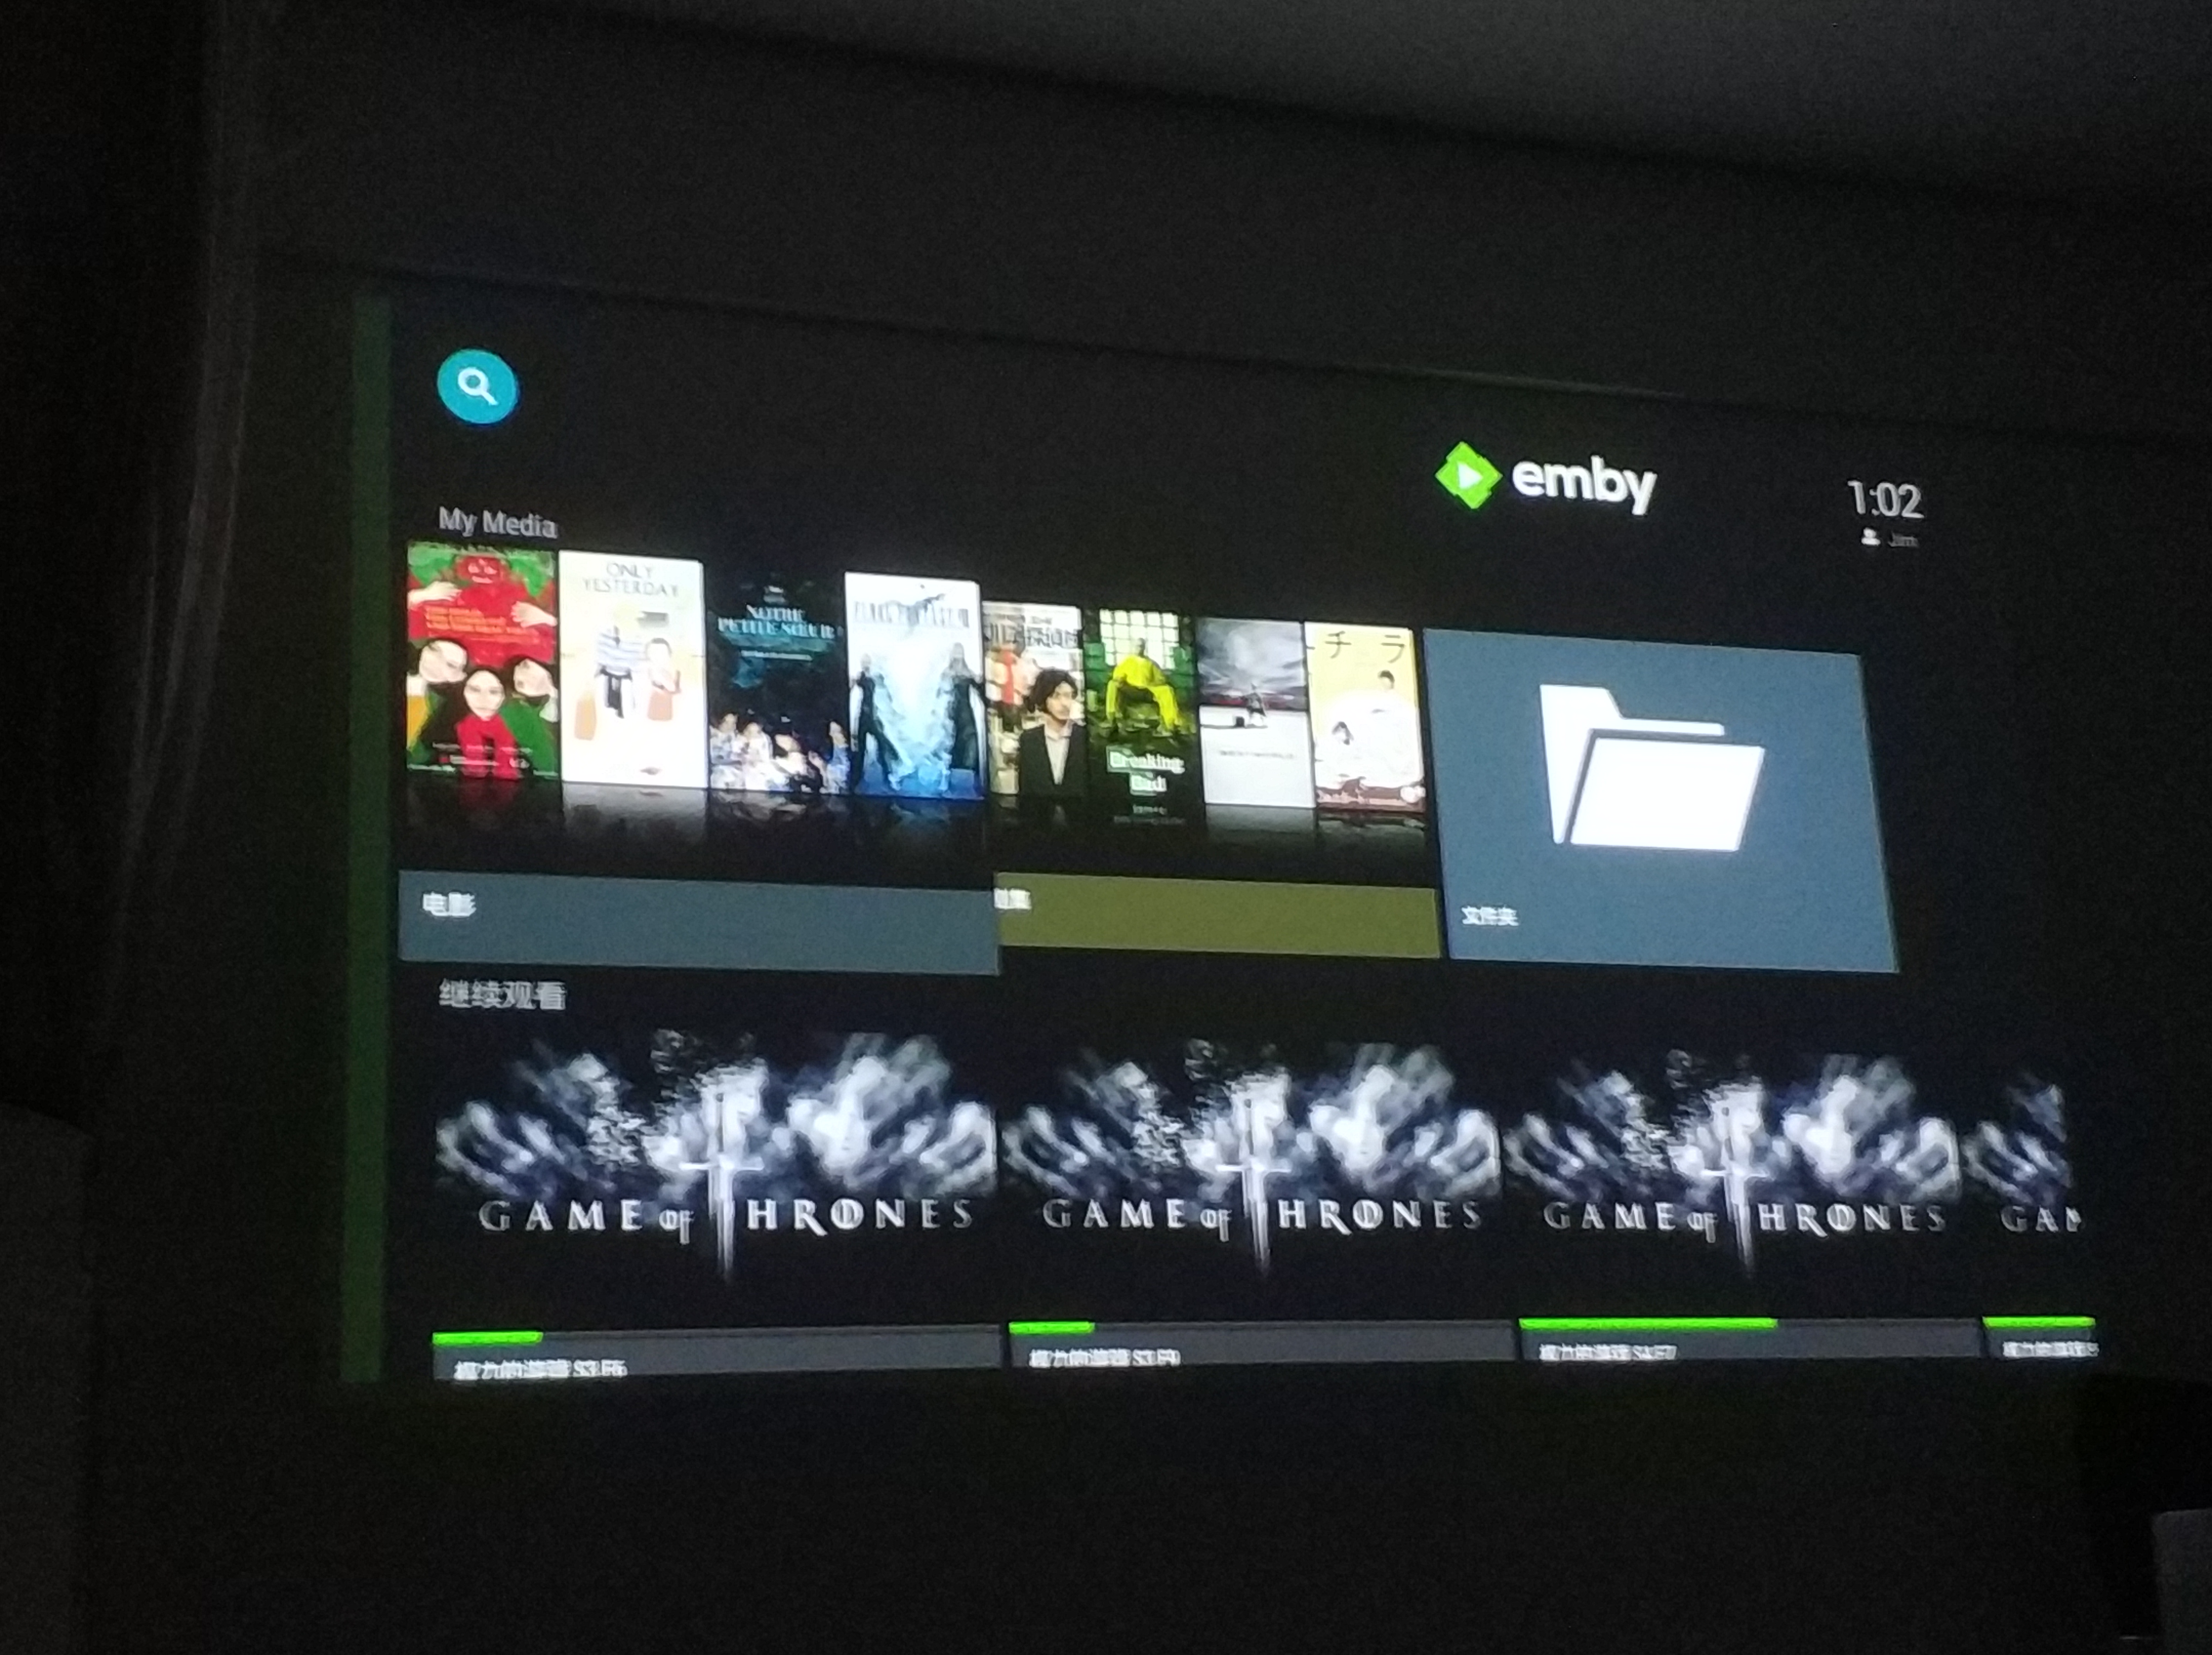 Emby Android TV 客户端的主界面（拍糊了）